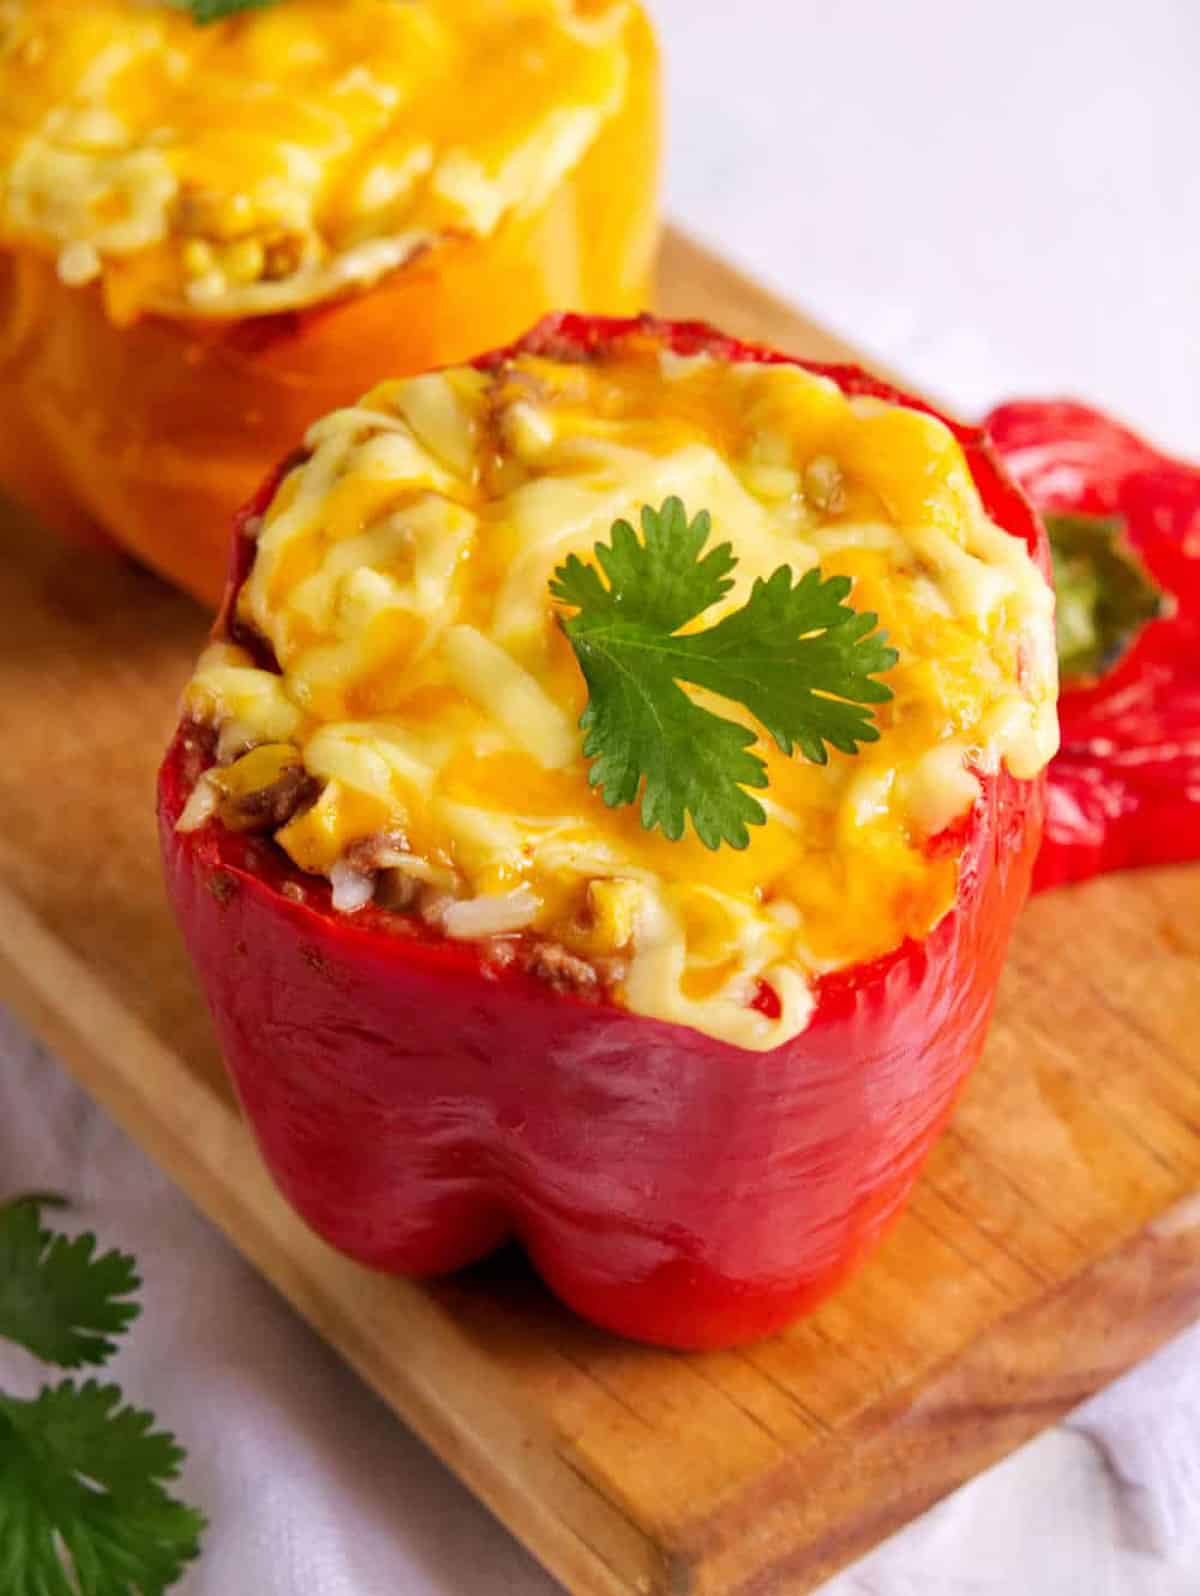 Stuffed bell pepper filled with veggies and melted cheese, on a wooden cutting board.